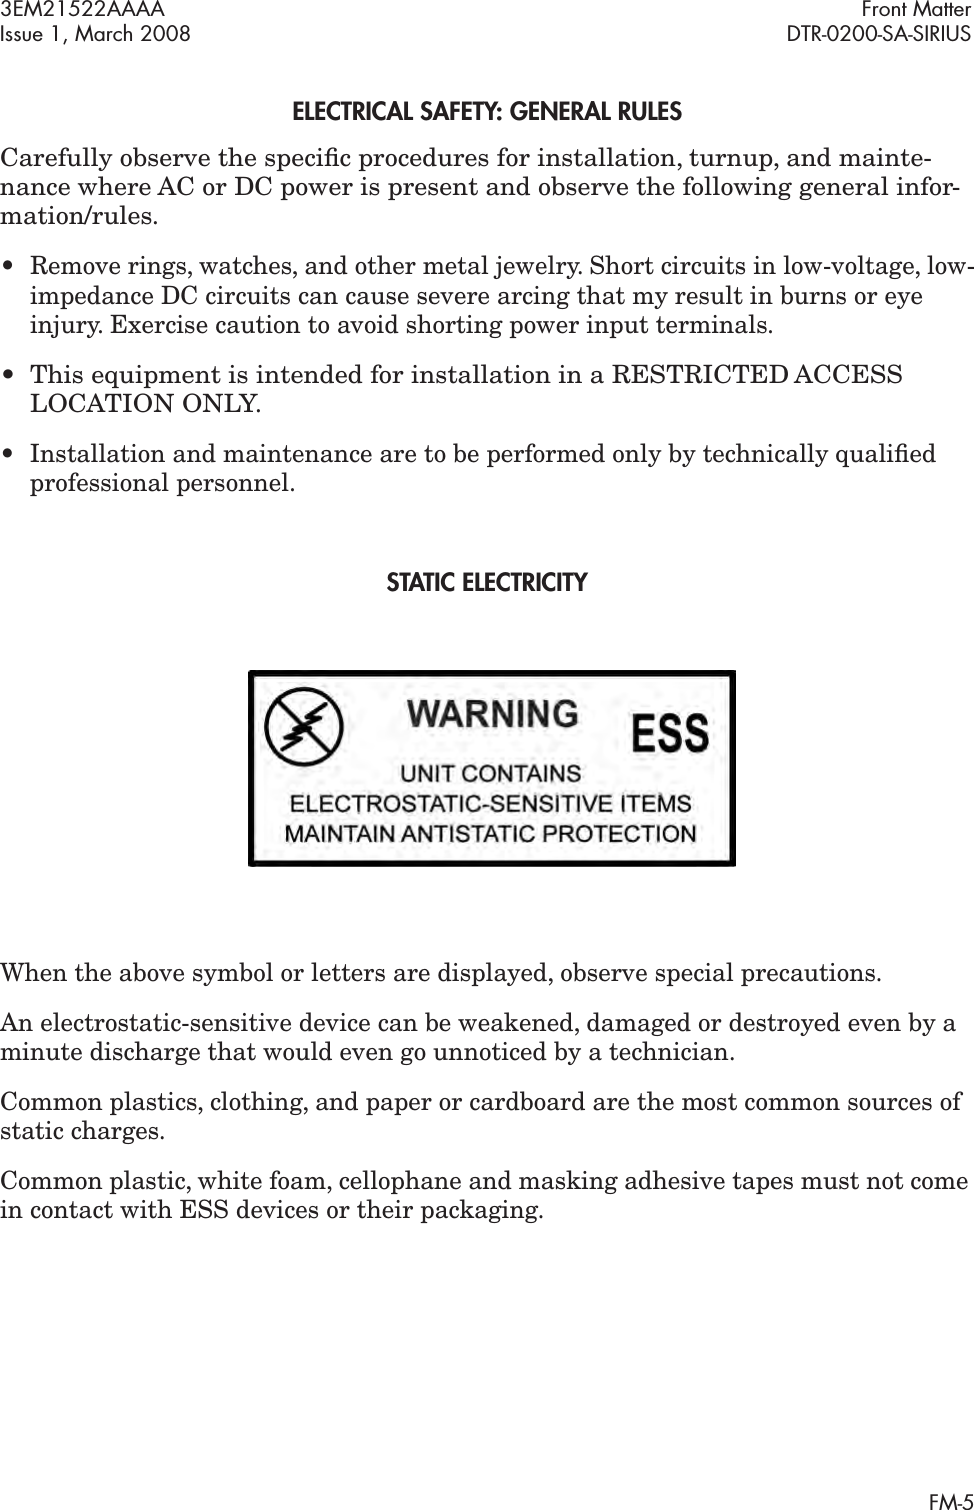  3EM21522AAAA  Front Matter Issue 1, March 2008 DTR-0200-SA-SIRIUS FM- 5 ELECTRICAL SAFETY : GENERAL RULES Carefully observe the speciﬁ c procedures for installation, turnup, and mainte-nance where AC or DC power is present and observe the following general infor-mation/rules.• Remove rings, watches, and other metal jewelry. Short circuits in low-voltage, low-impedance DC circuits can cause severe arcing that my result in burns or eye injury. Exercise caution to avoid shorting power input terminals. • This equipment is intended for installation in a RESTRICTED ACCESS LOCATION ONLY. • Installation and maintenance are to be performed only by technically qualiﬁed professional personnel. ST ATIC ELECTRICITYWhen the above symbol or letters are displayed, observe special precautions.An electrostatic-sensitive device can be weakened, damaged or destroyed even by a minute discharge that would even go unnoticed by a technician.Common plastics, clothing, and paper or cardboard are the most common sources of static charges. Common plastic, white foam, cellophane and masking adhesive tapes must not come in contact with ESS devices or their packaging.